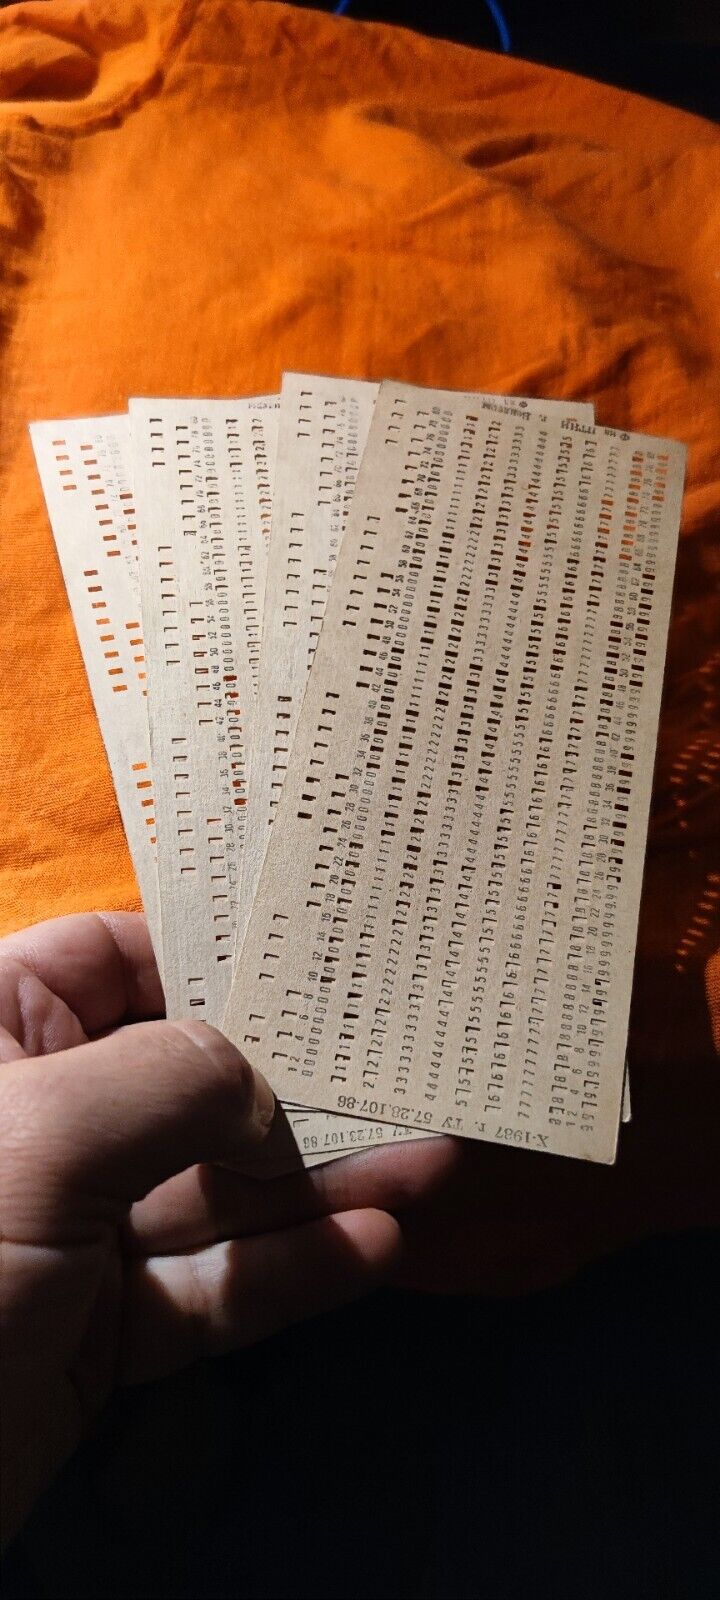 2x VINTAGE MAINFRAME COMPUTER Perforated PUNCH CARDS  IBM 80 column card format